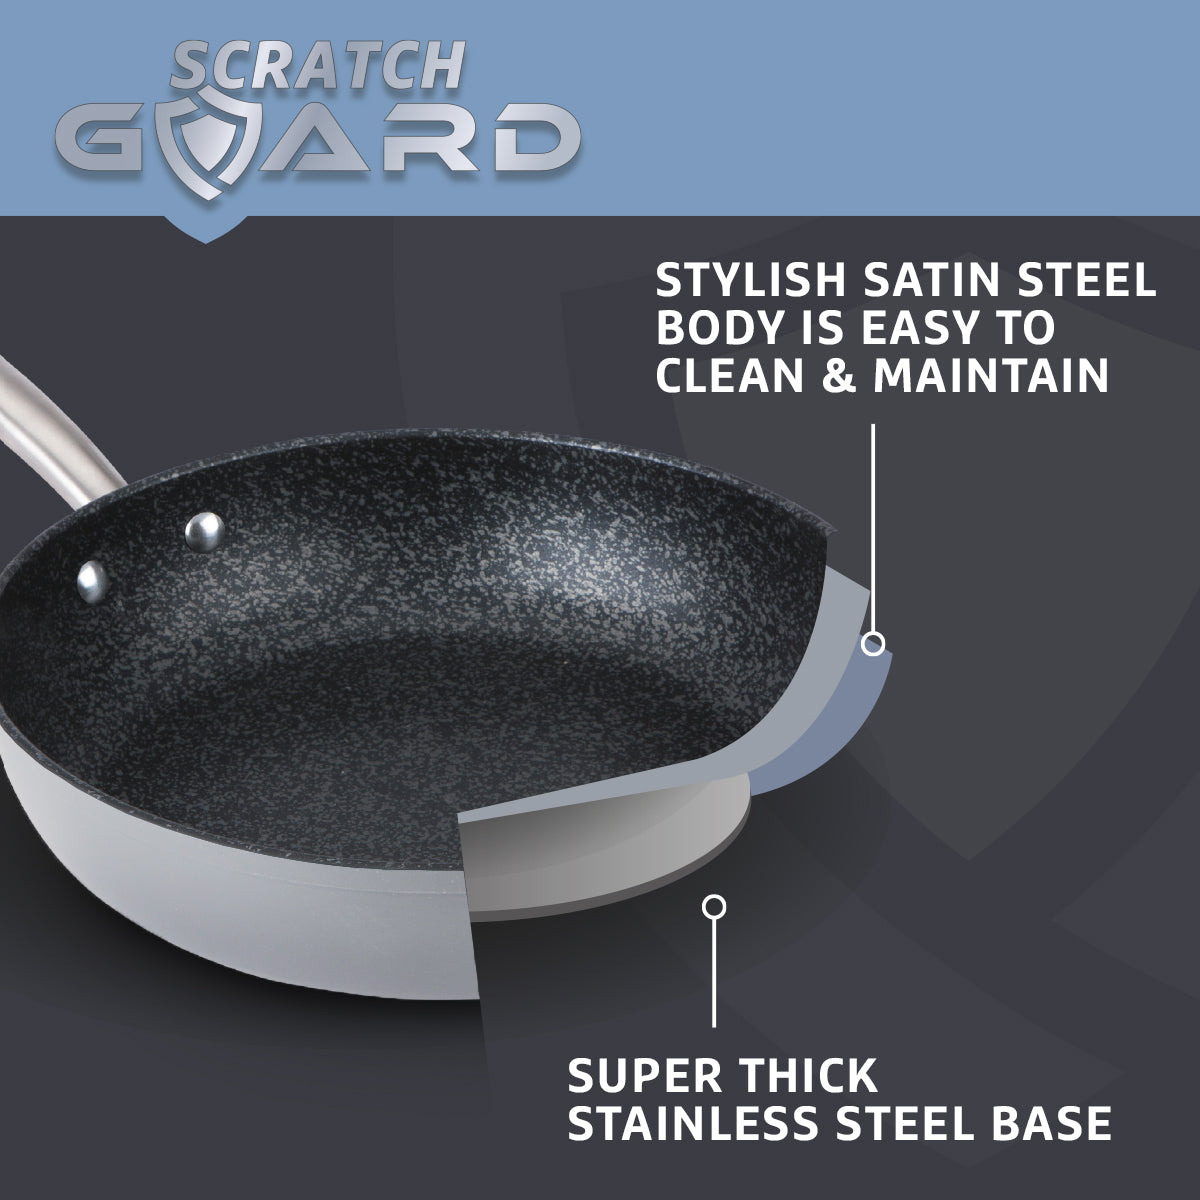 Prestige Scratch Guard Stainless Steel Cookware Set, 5 Pcs Home and beyond